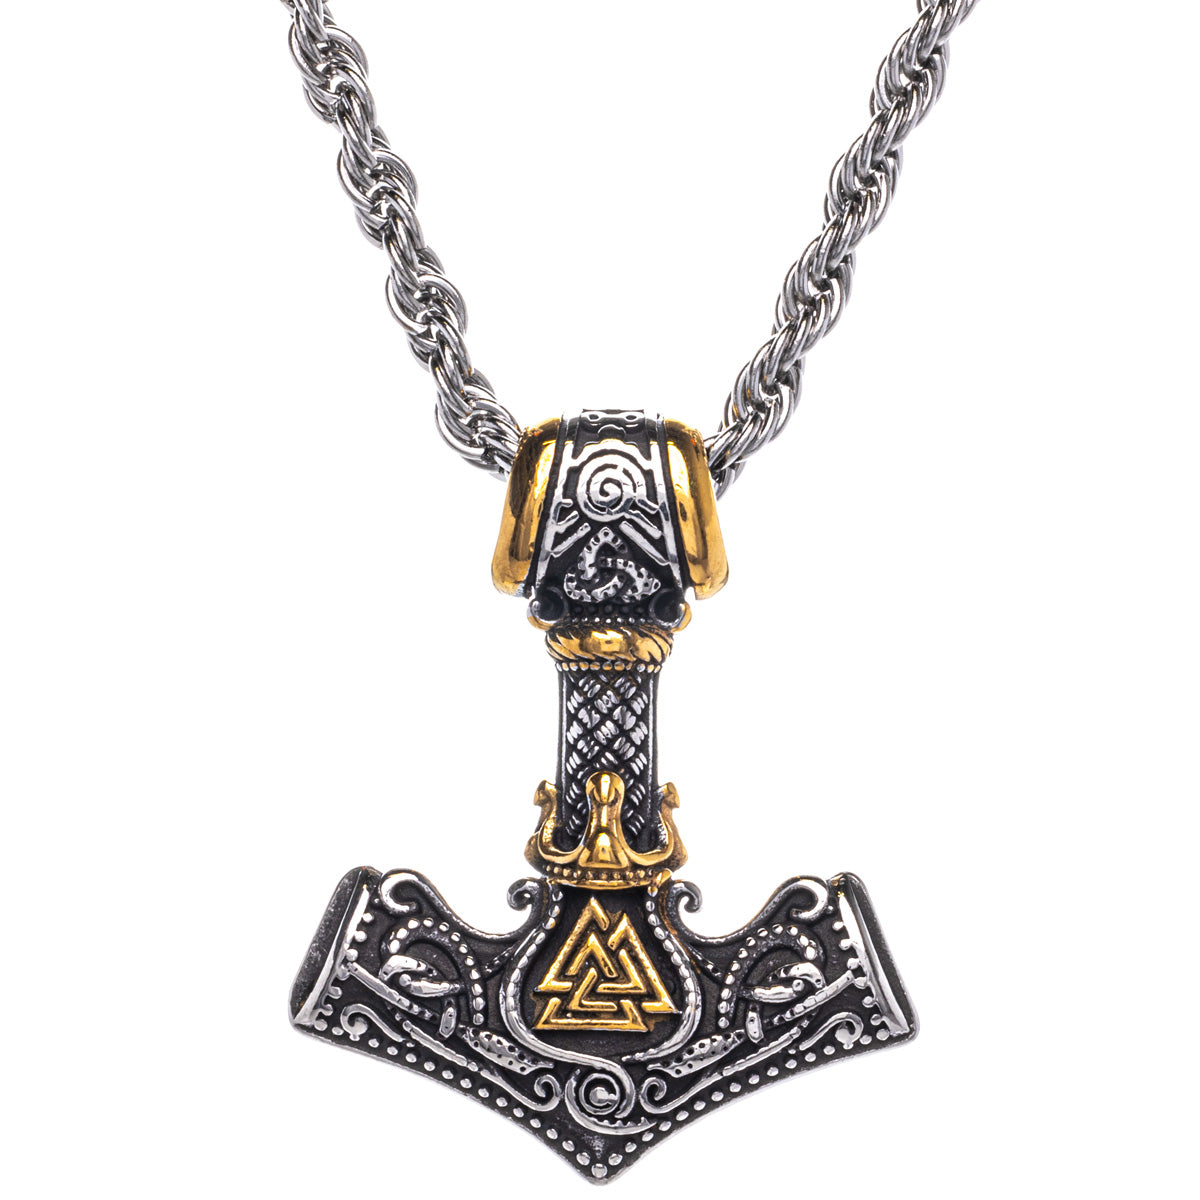 Two-tone Thor's hammer Mjölnir pendant necklace with White Nut symbol (Steel 316L)